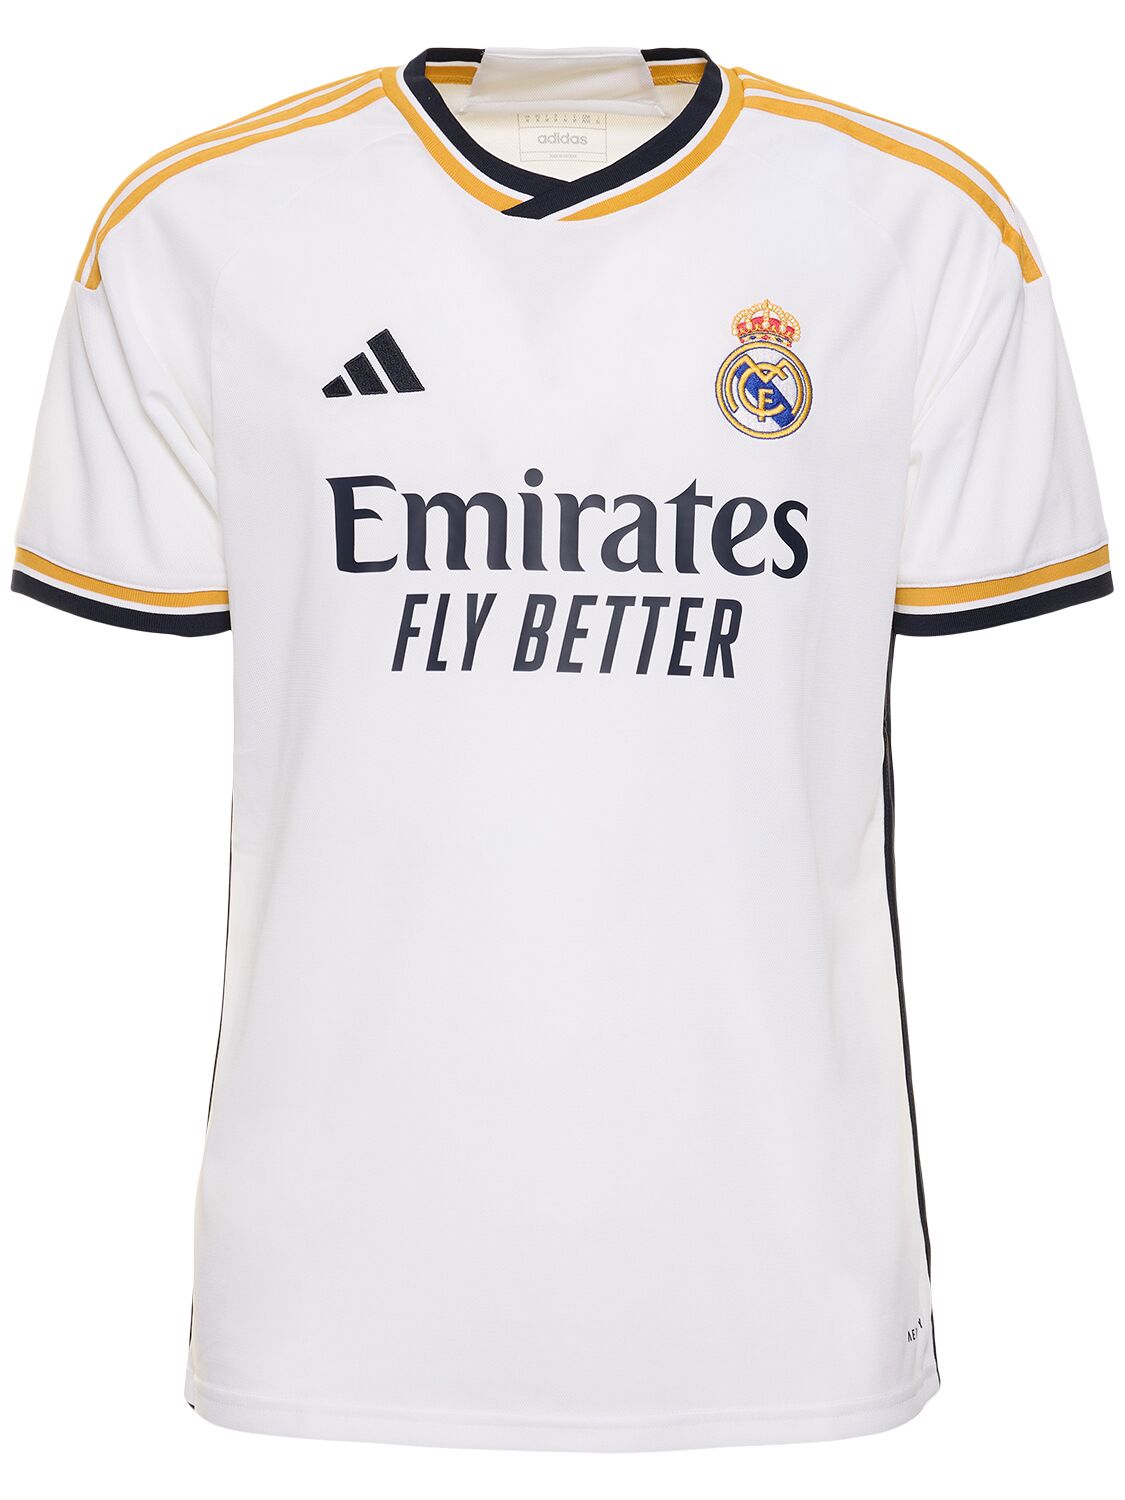 Adidas Originals Real Madrid Jersey In White